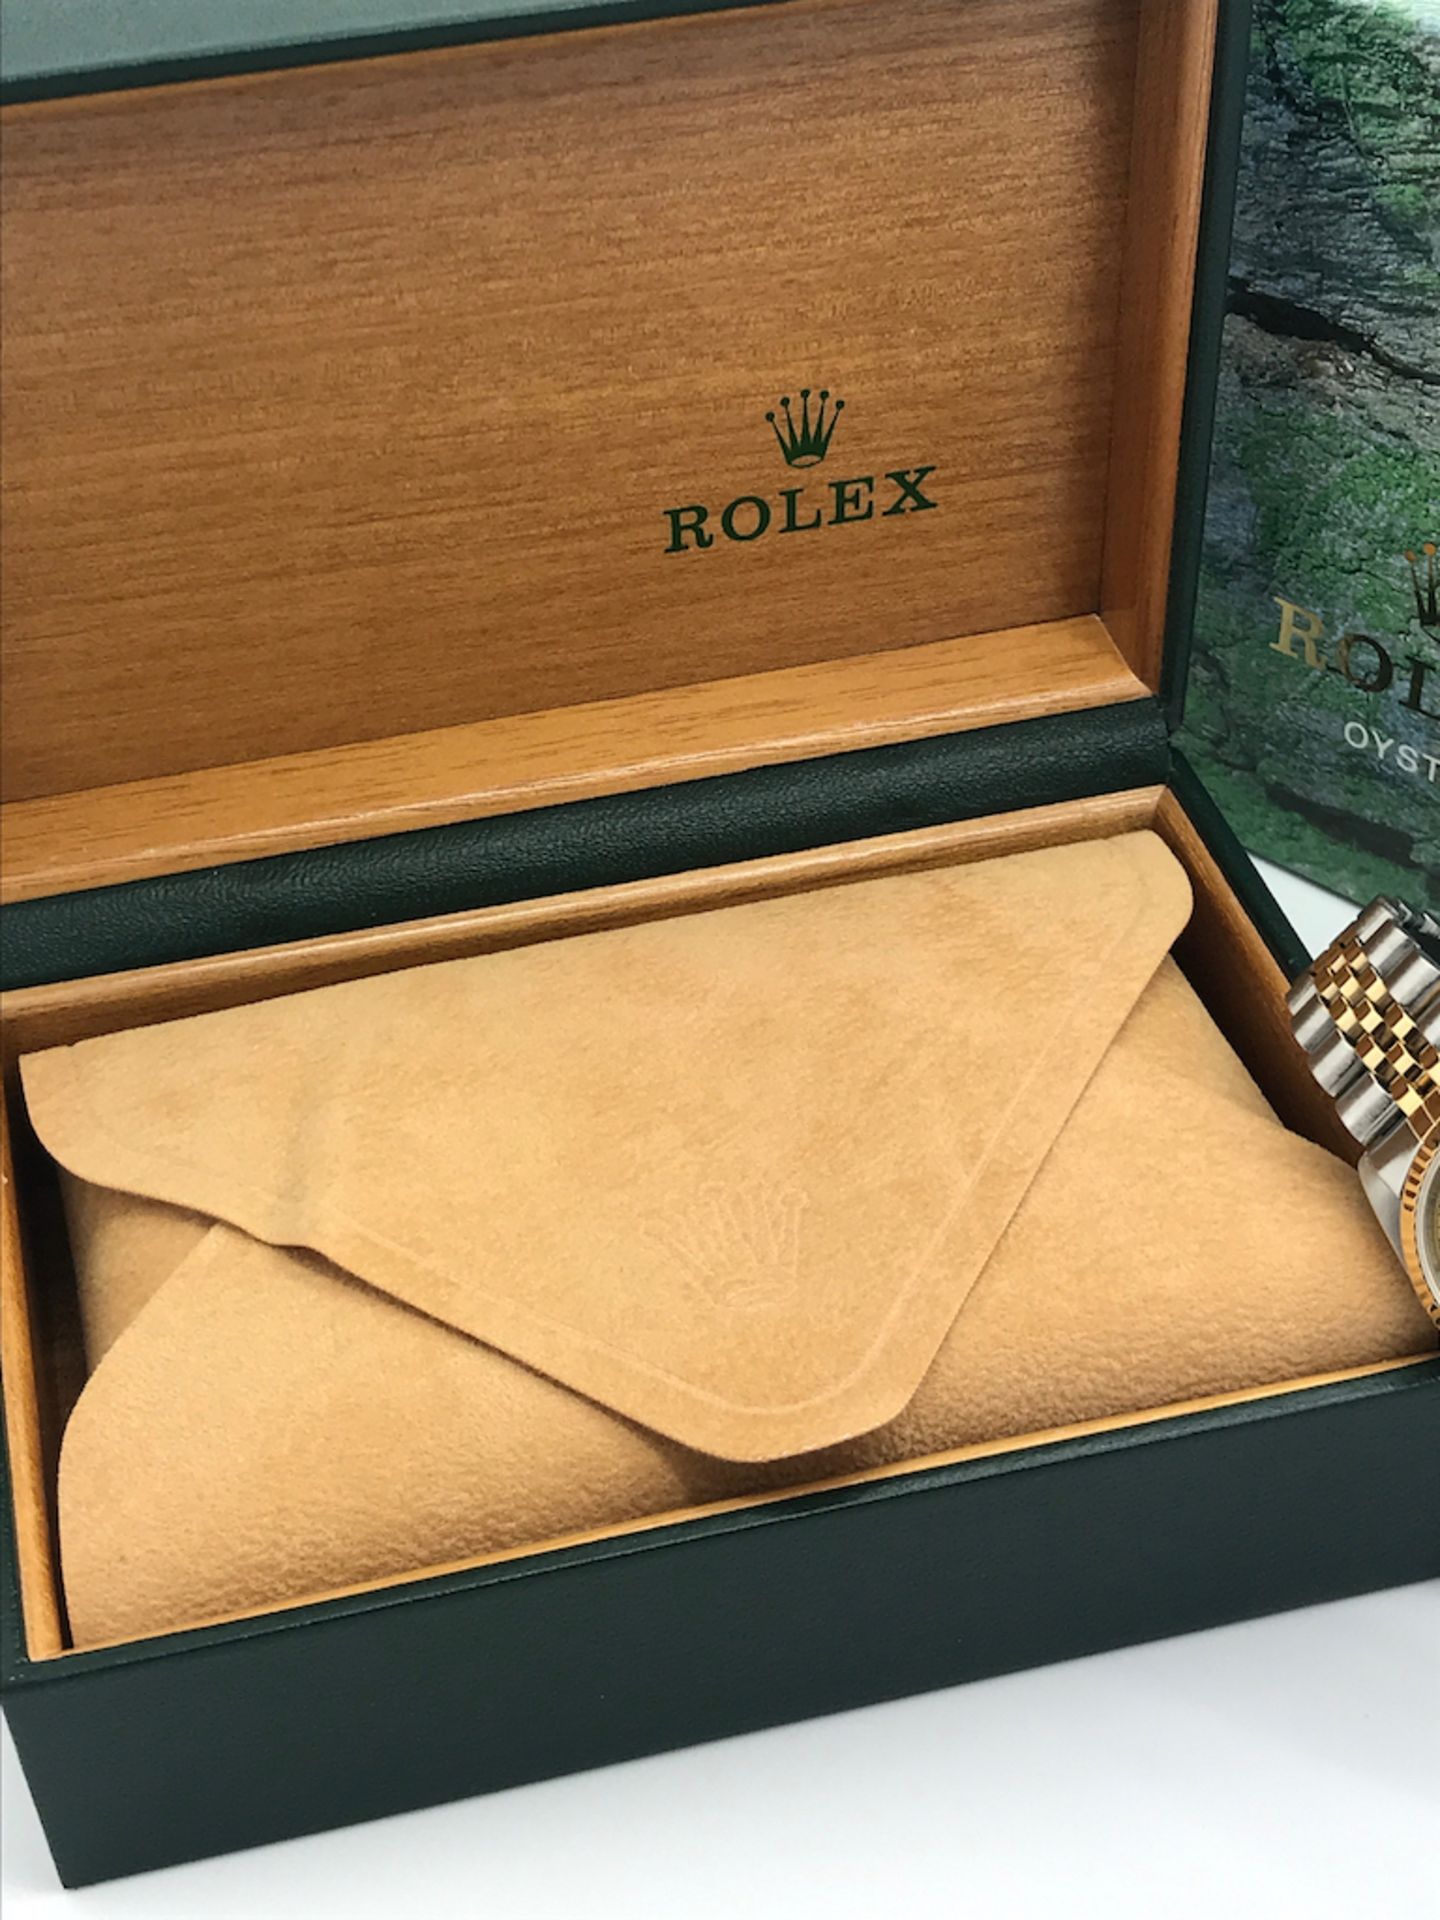 Rolex Datejust 'Champagne' 31mm (Mid-size) Ref. 68273 - Steel/ 18ct Yellow Gold - Image 6 of 6